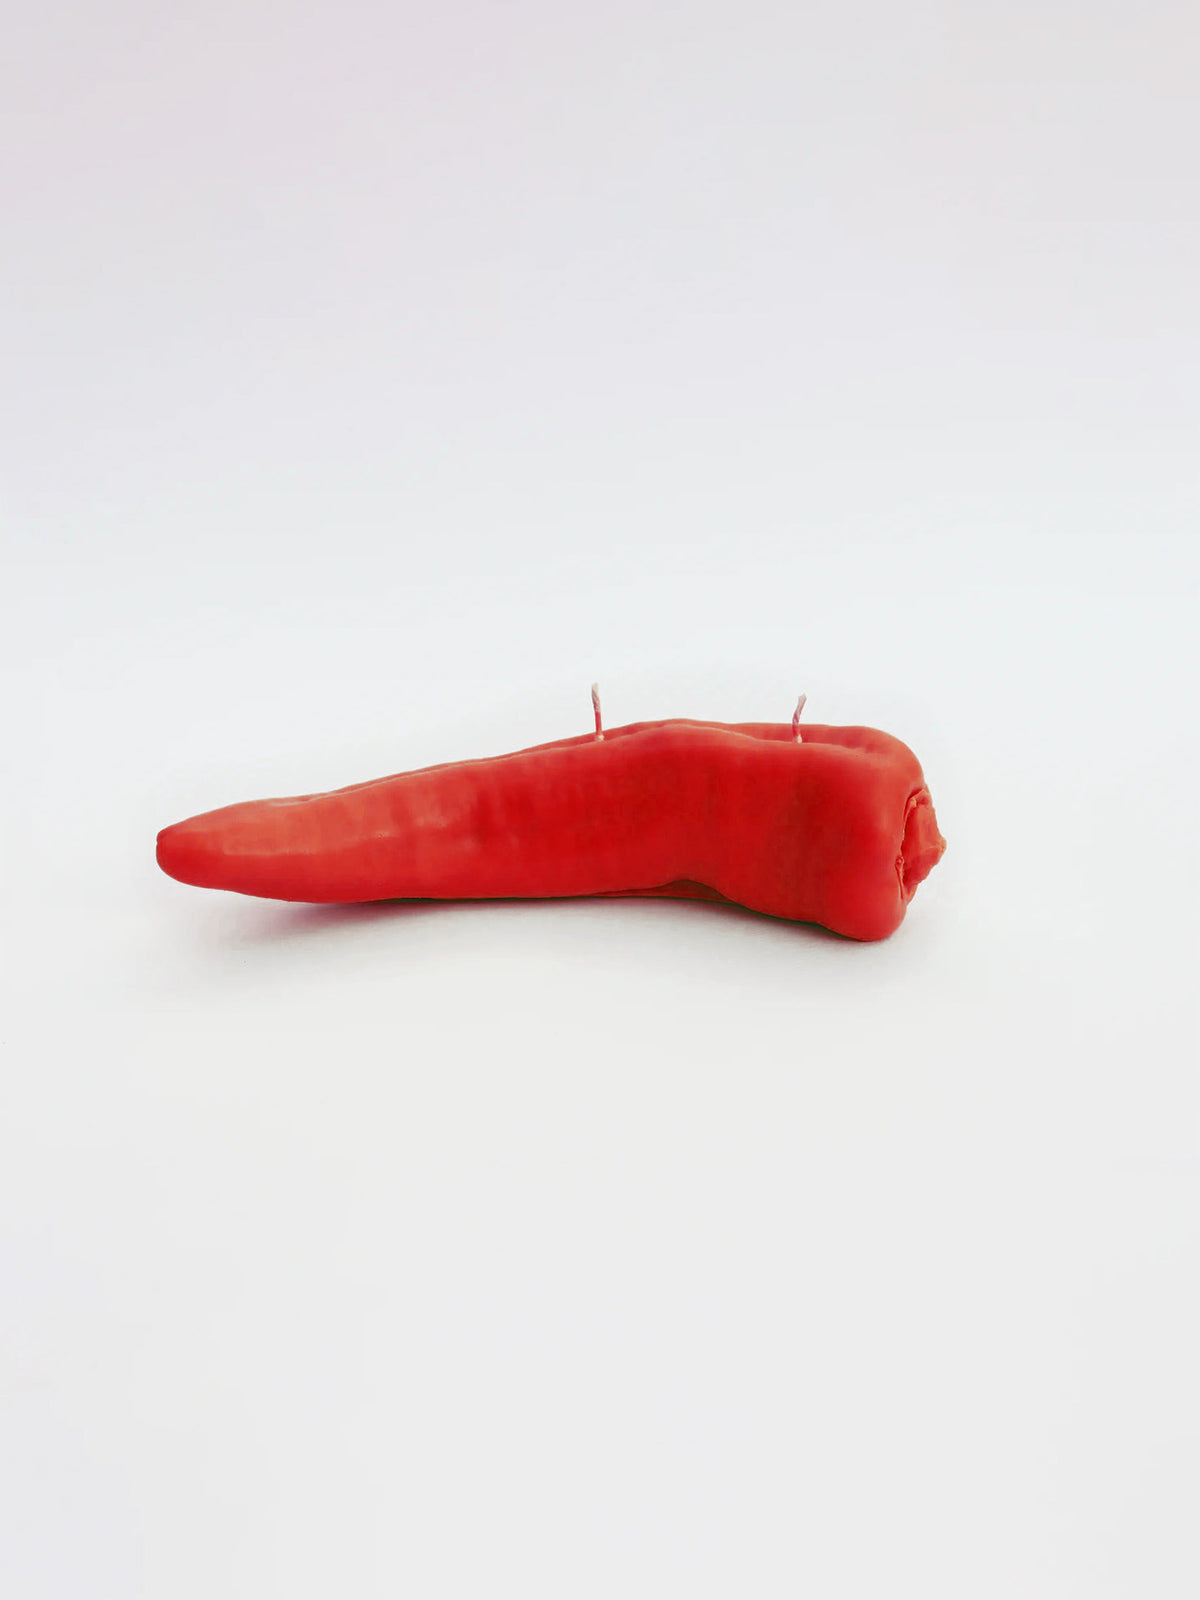 A Red Chilli Candle by Nonna&#39;s Grocer on a white background.